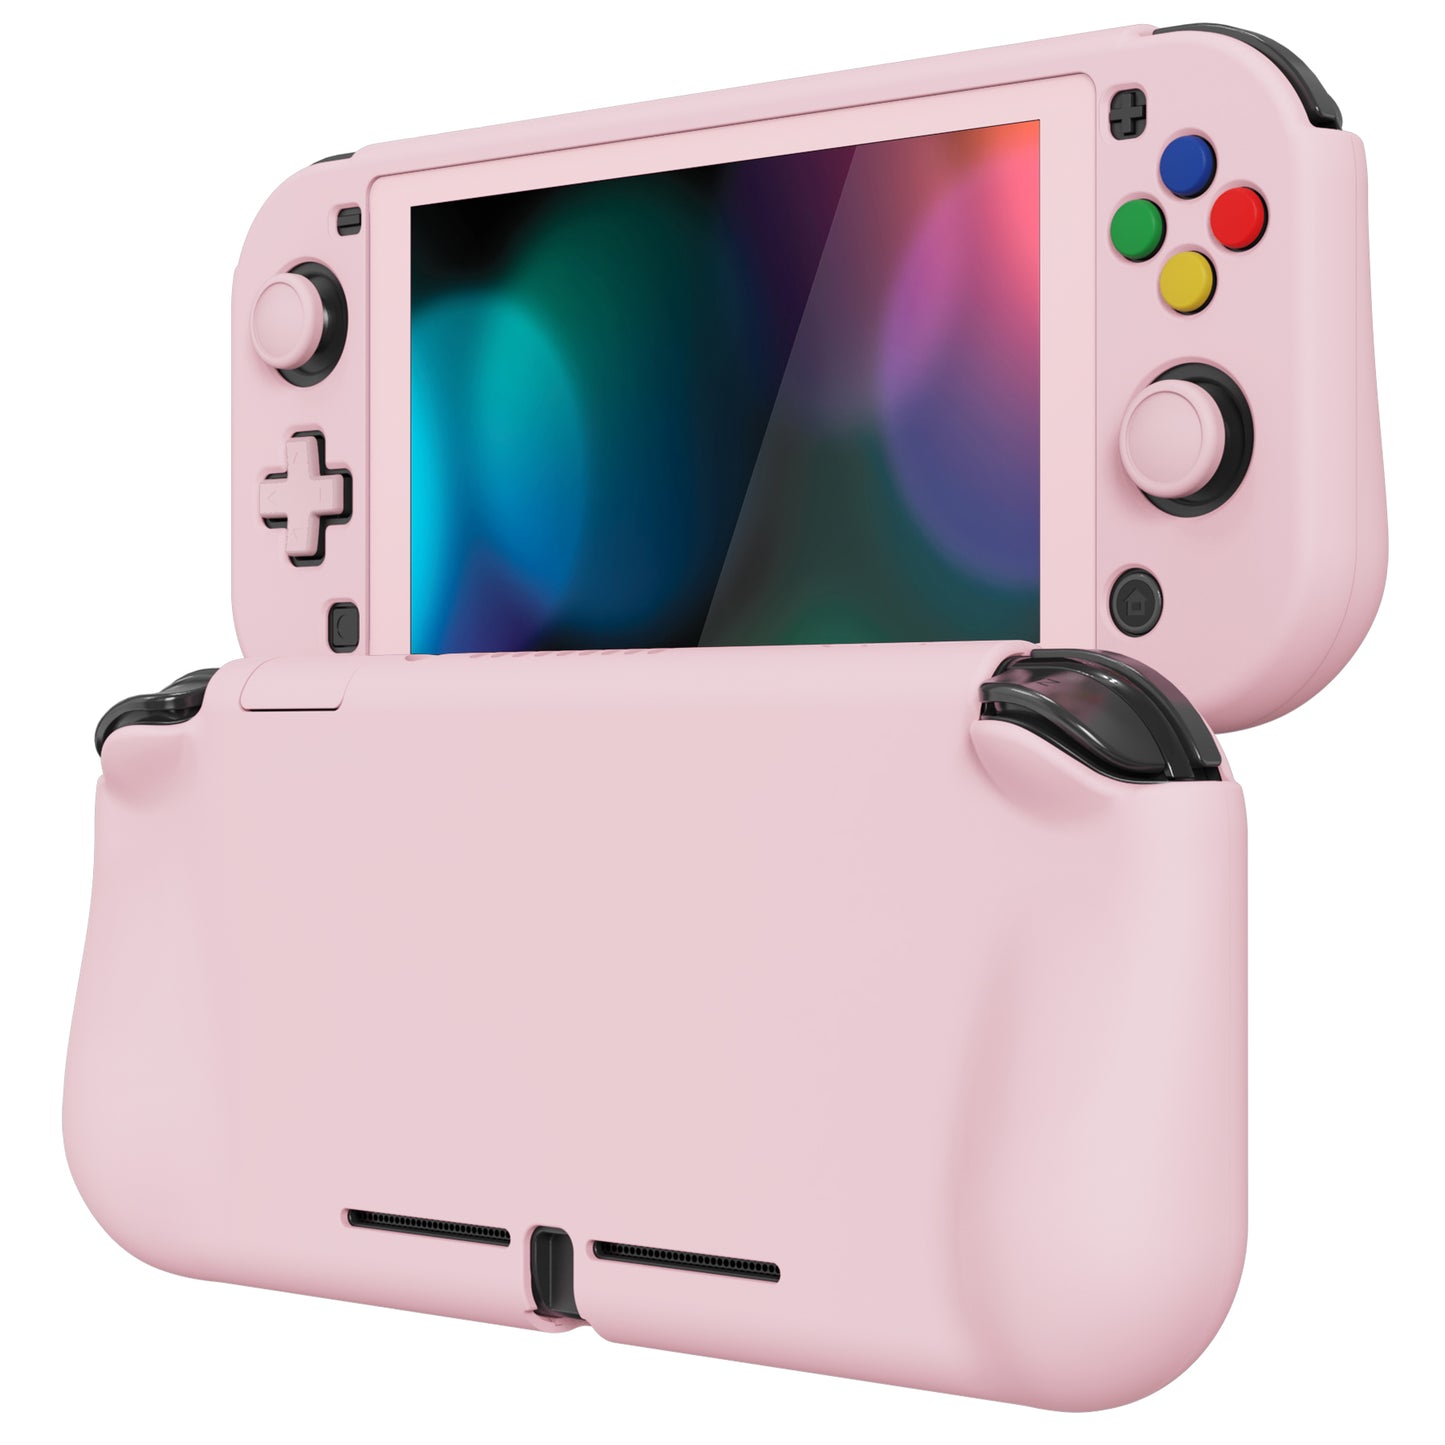 PlayVital ZealProtect Protective Case for Nintendo Switch Lite, Hard Shell Ergonomic Grip Cover for Nintendo Switch Lite w/Screen Protector & Thumb Grip Caps & Button Caps - Cherry Blossoms Pink - PSLYP3001 playvital